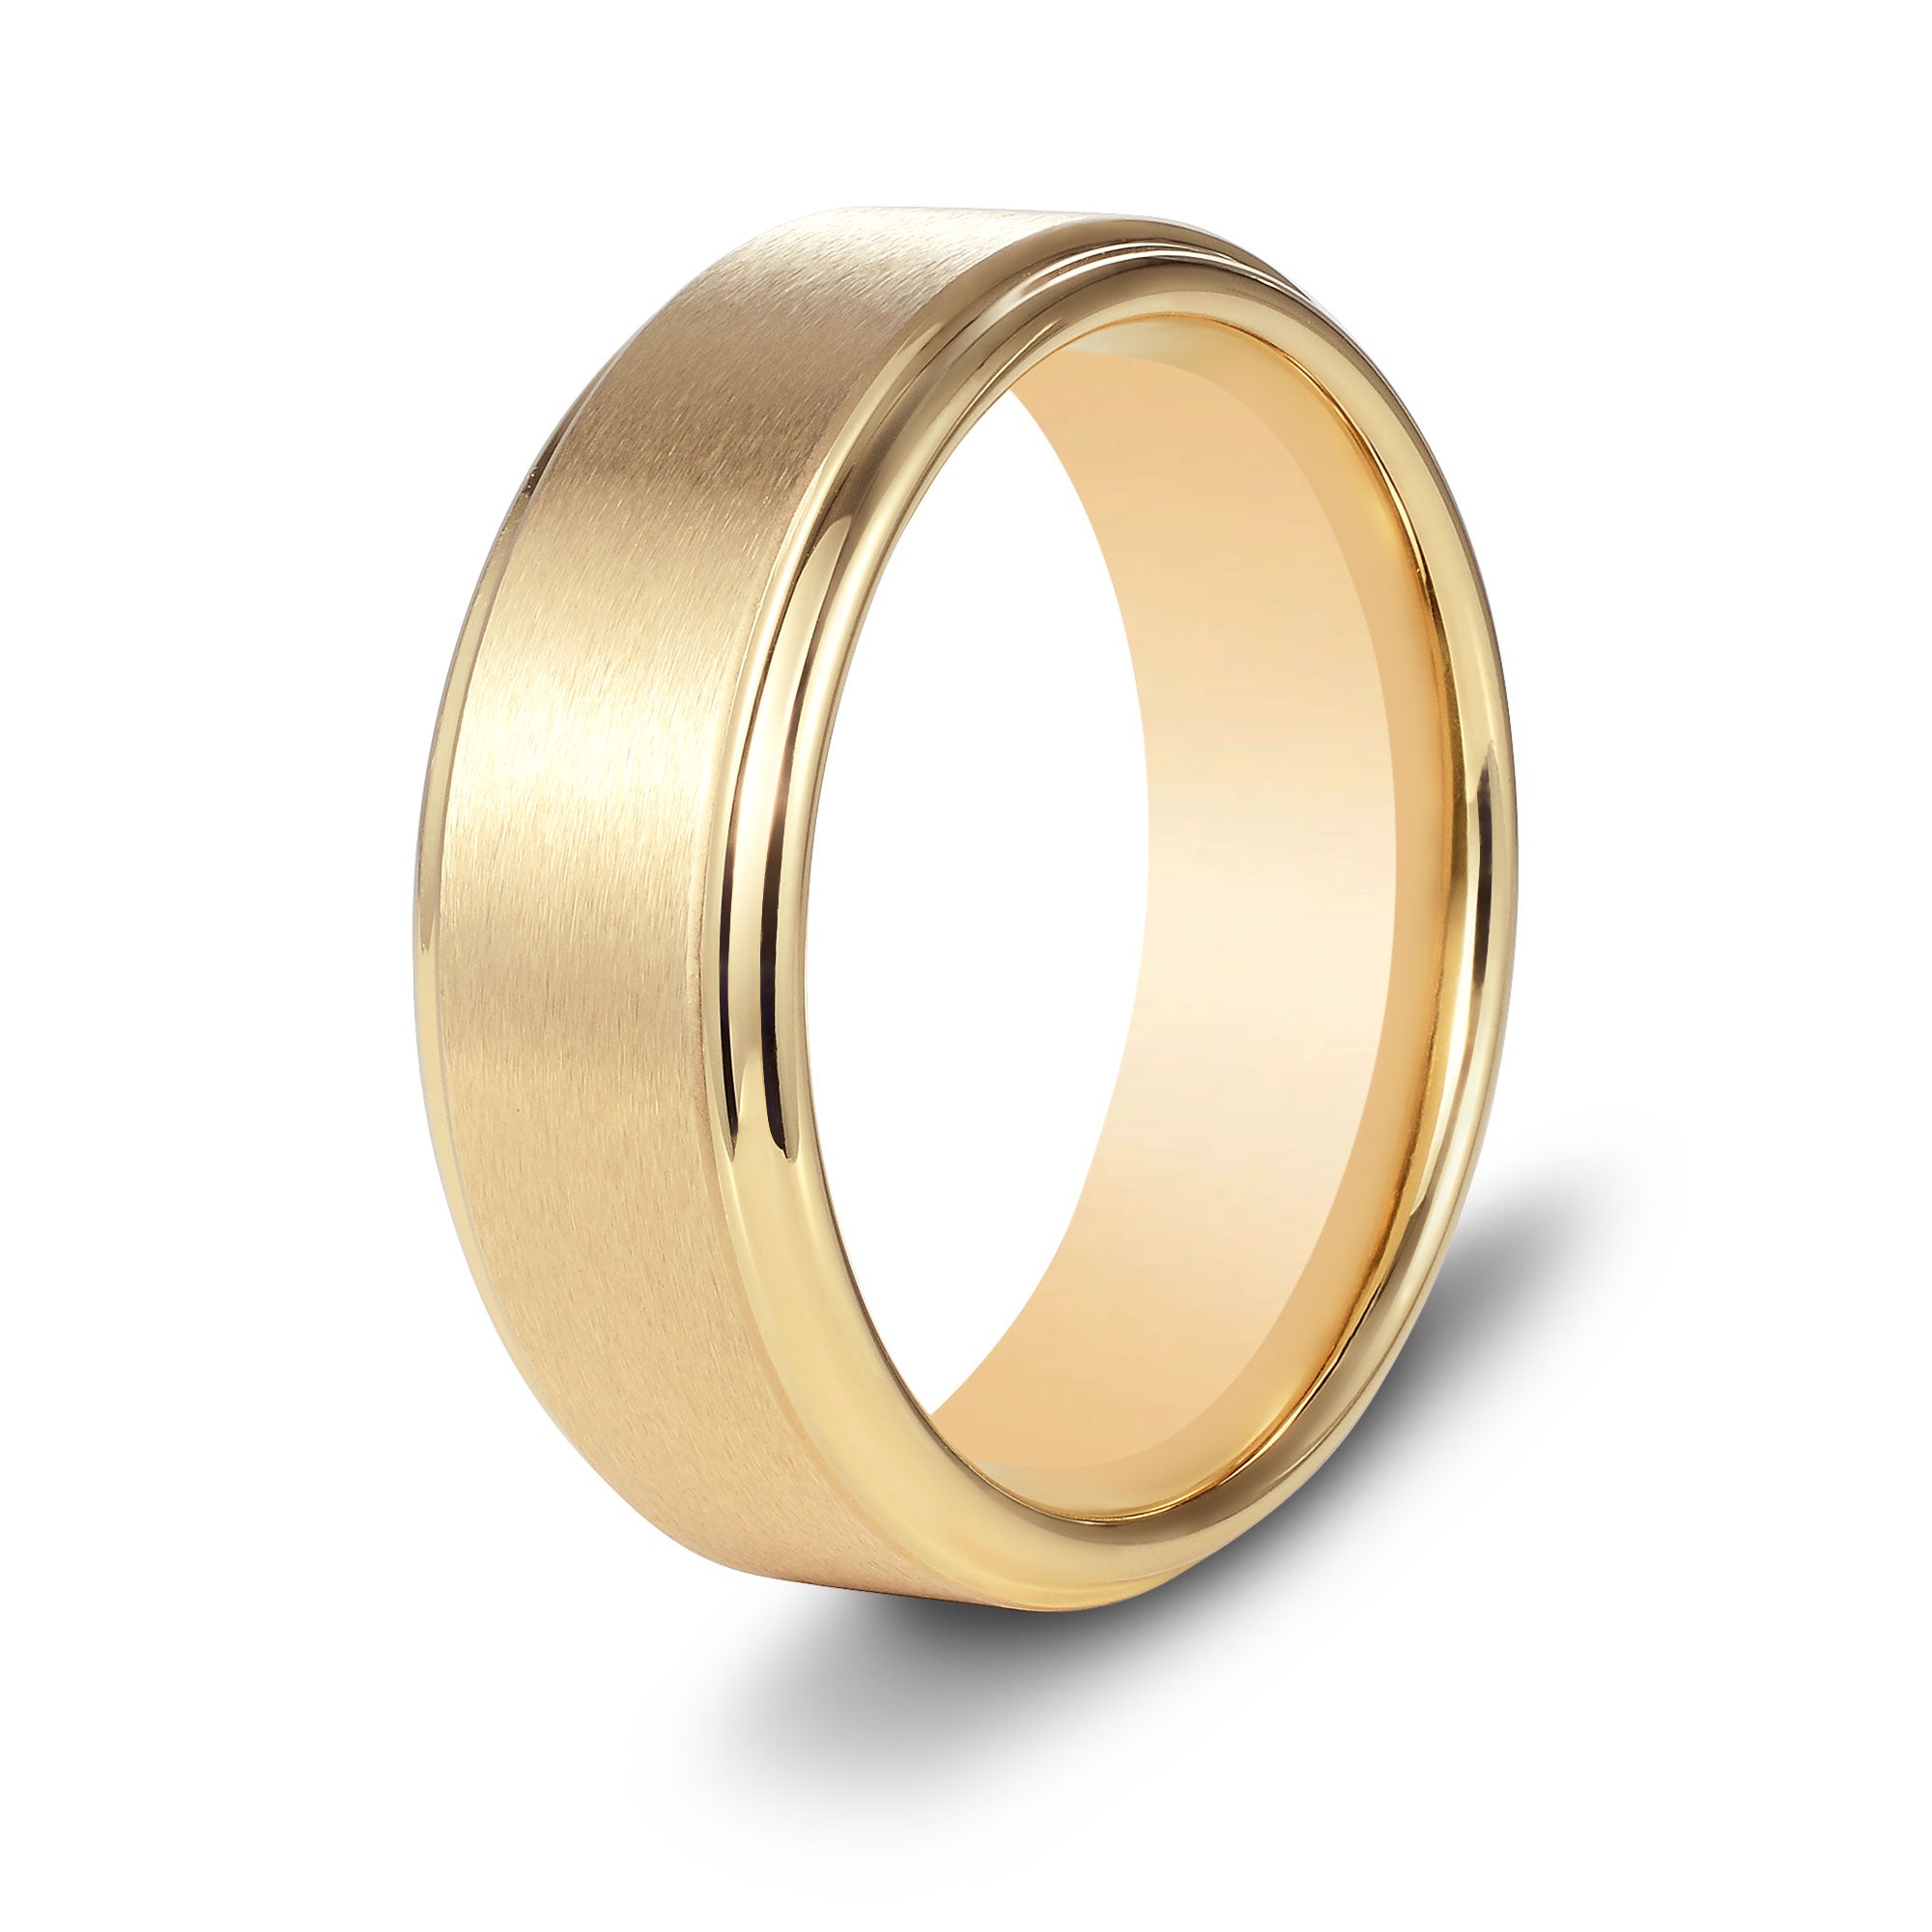 The VIP - Gold Brushed Tungsten Ring